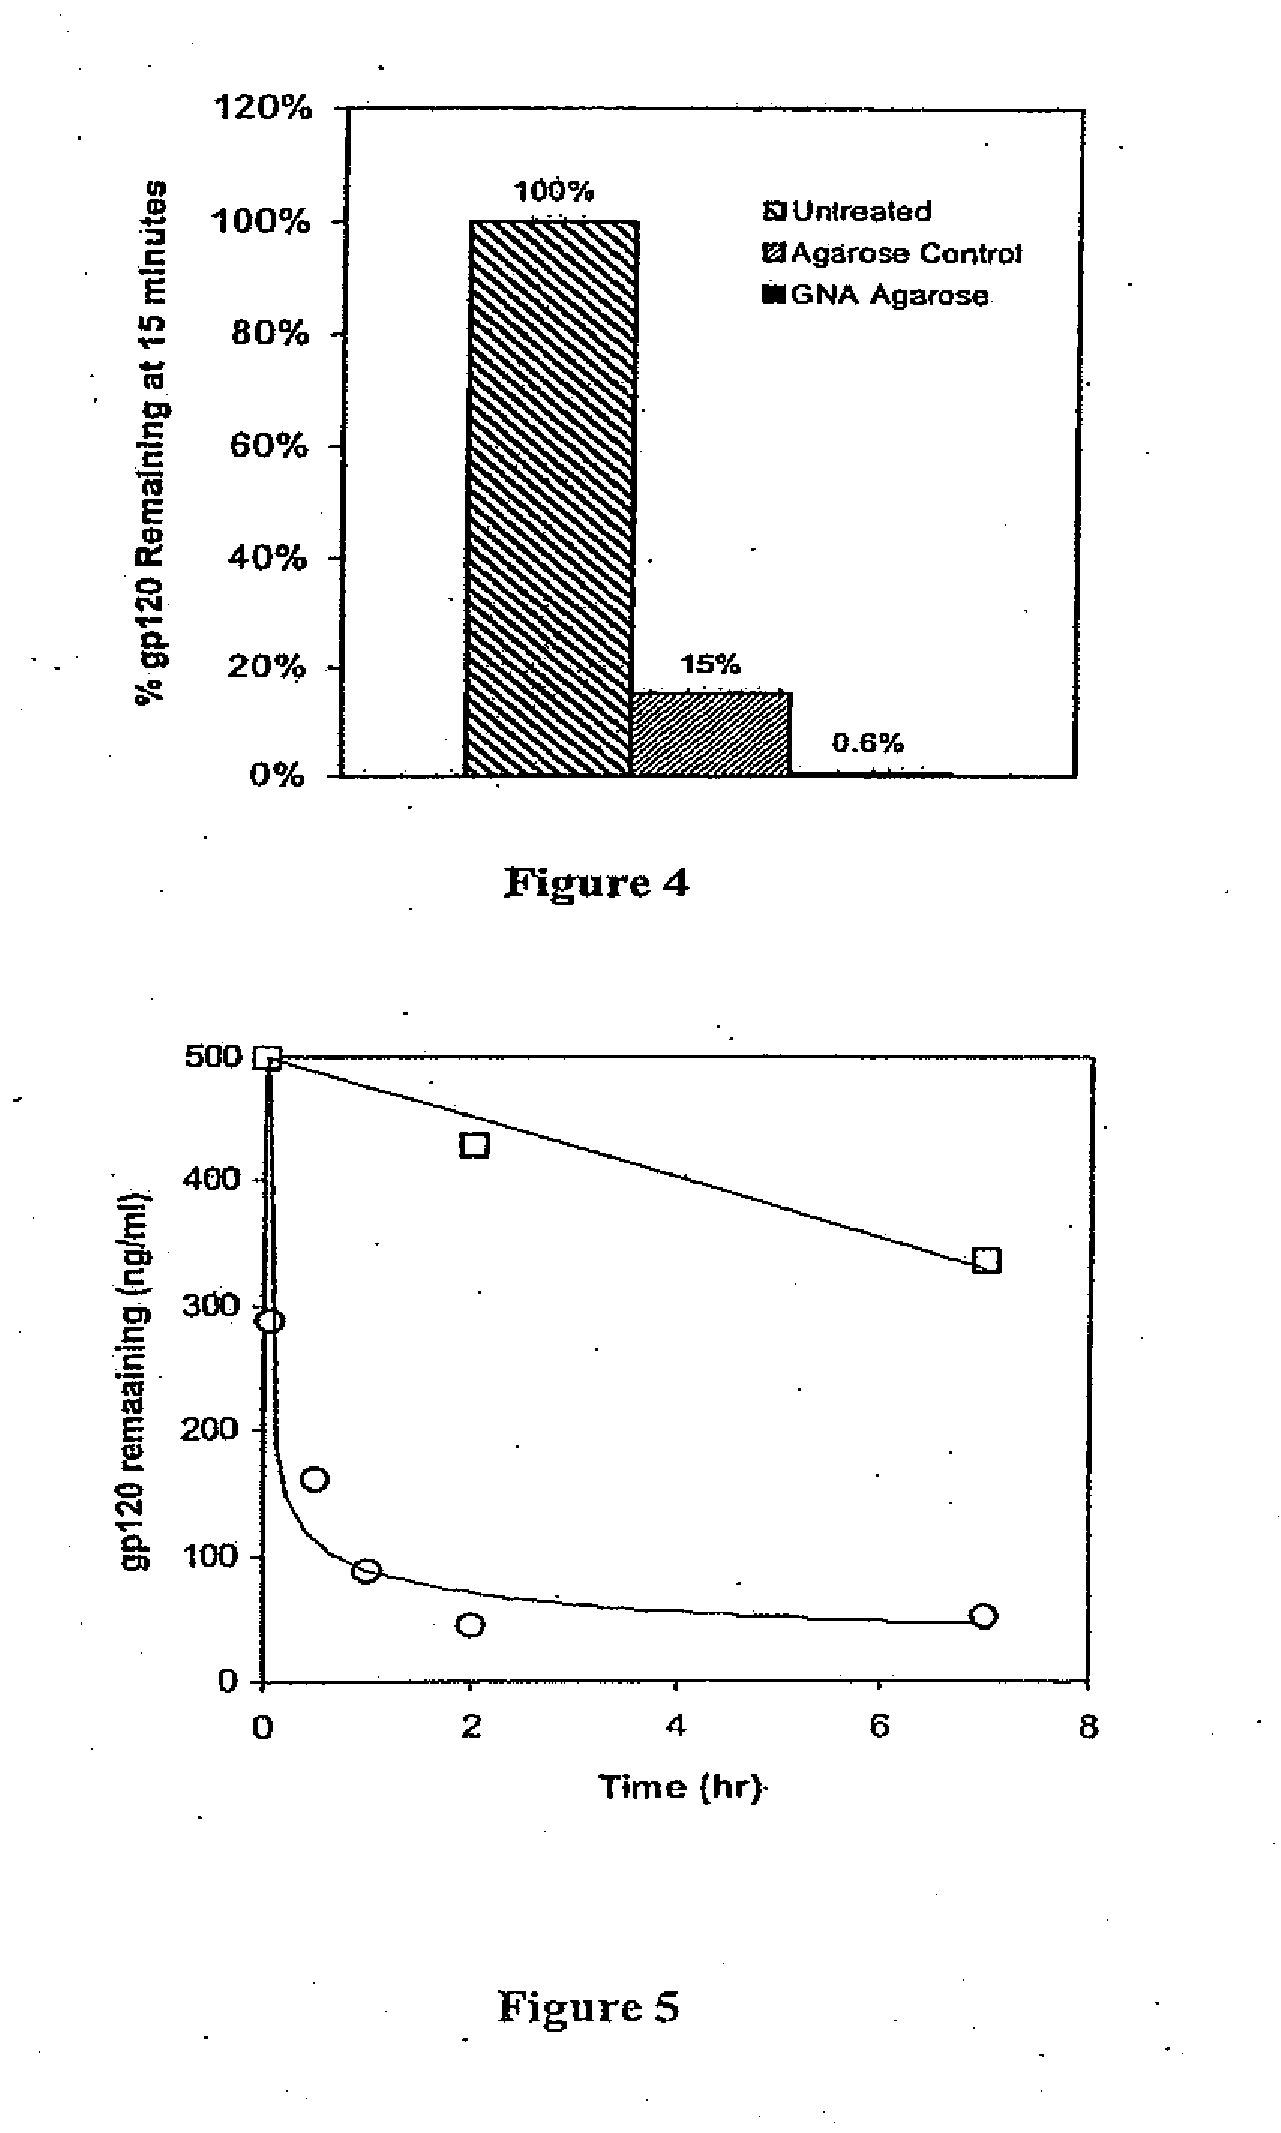 Method for removal of viruses from blood by lectin affinity hemodialysis